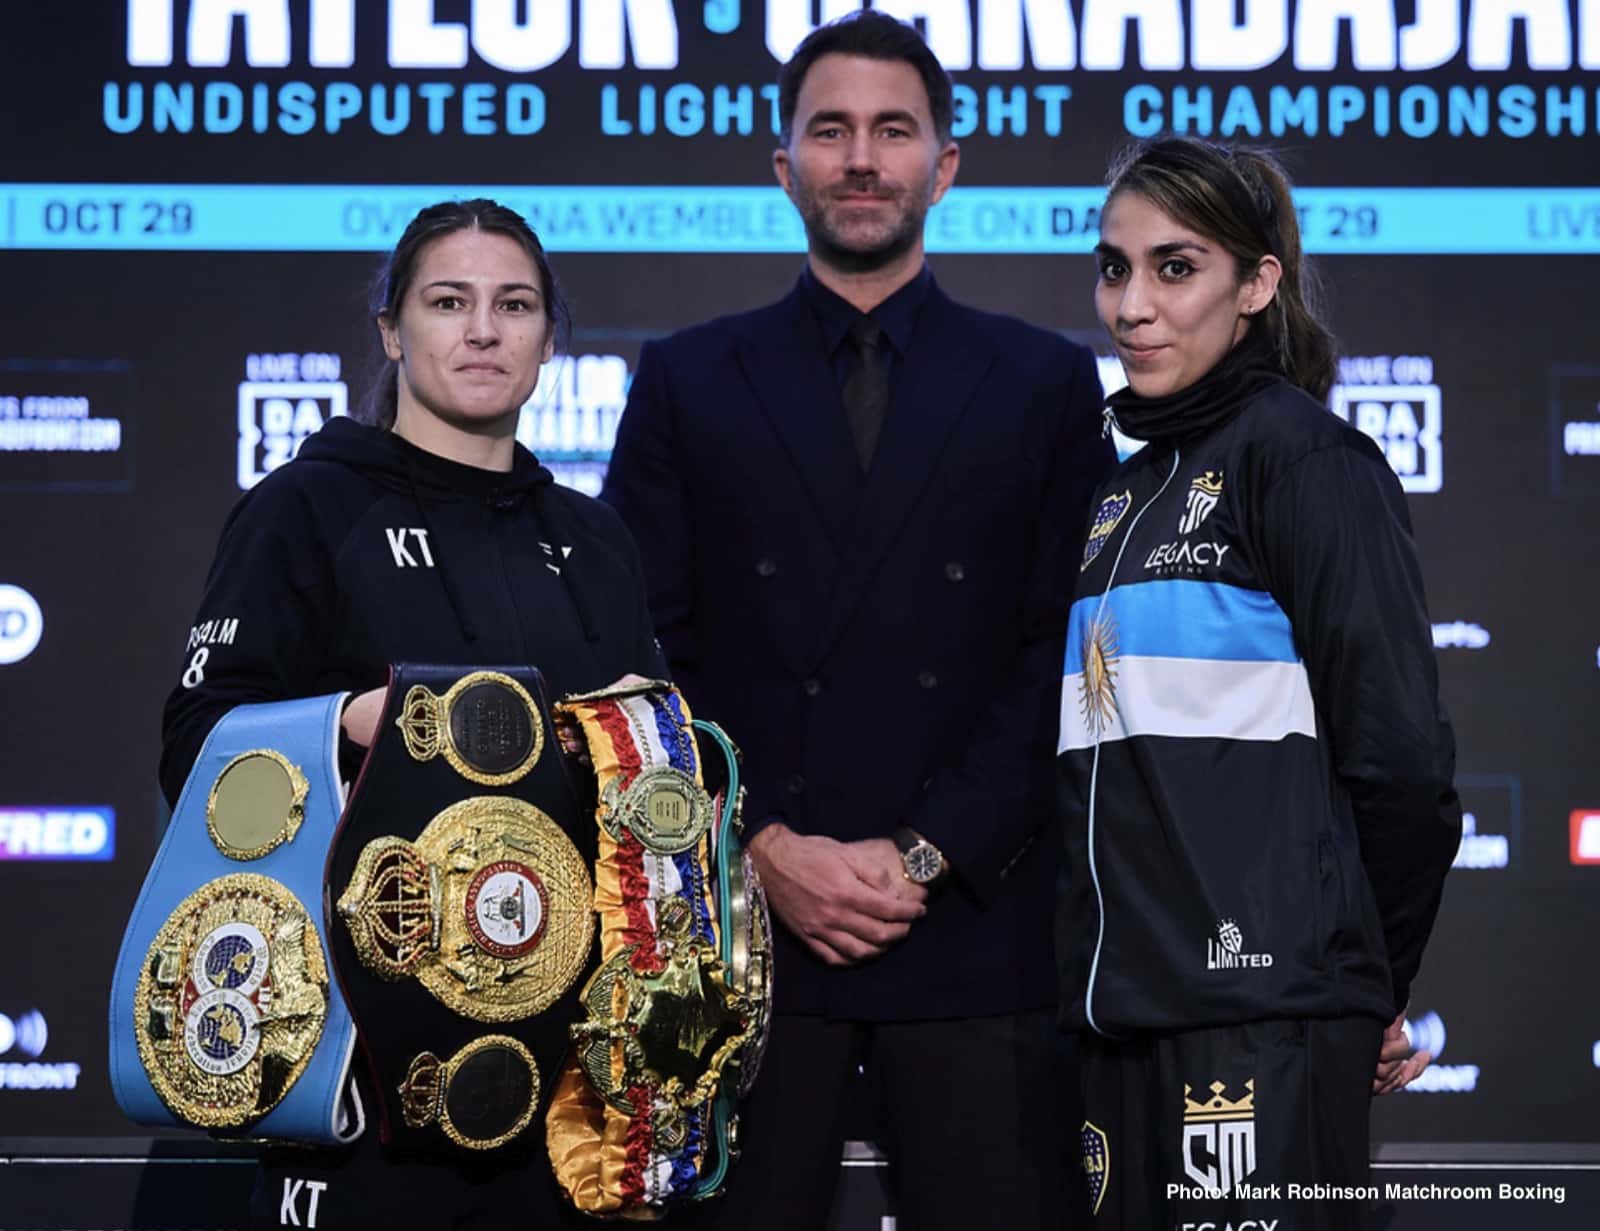 WATCH LIVE: Katie Taylor vs Carabajal Weigh In